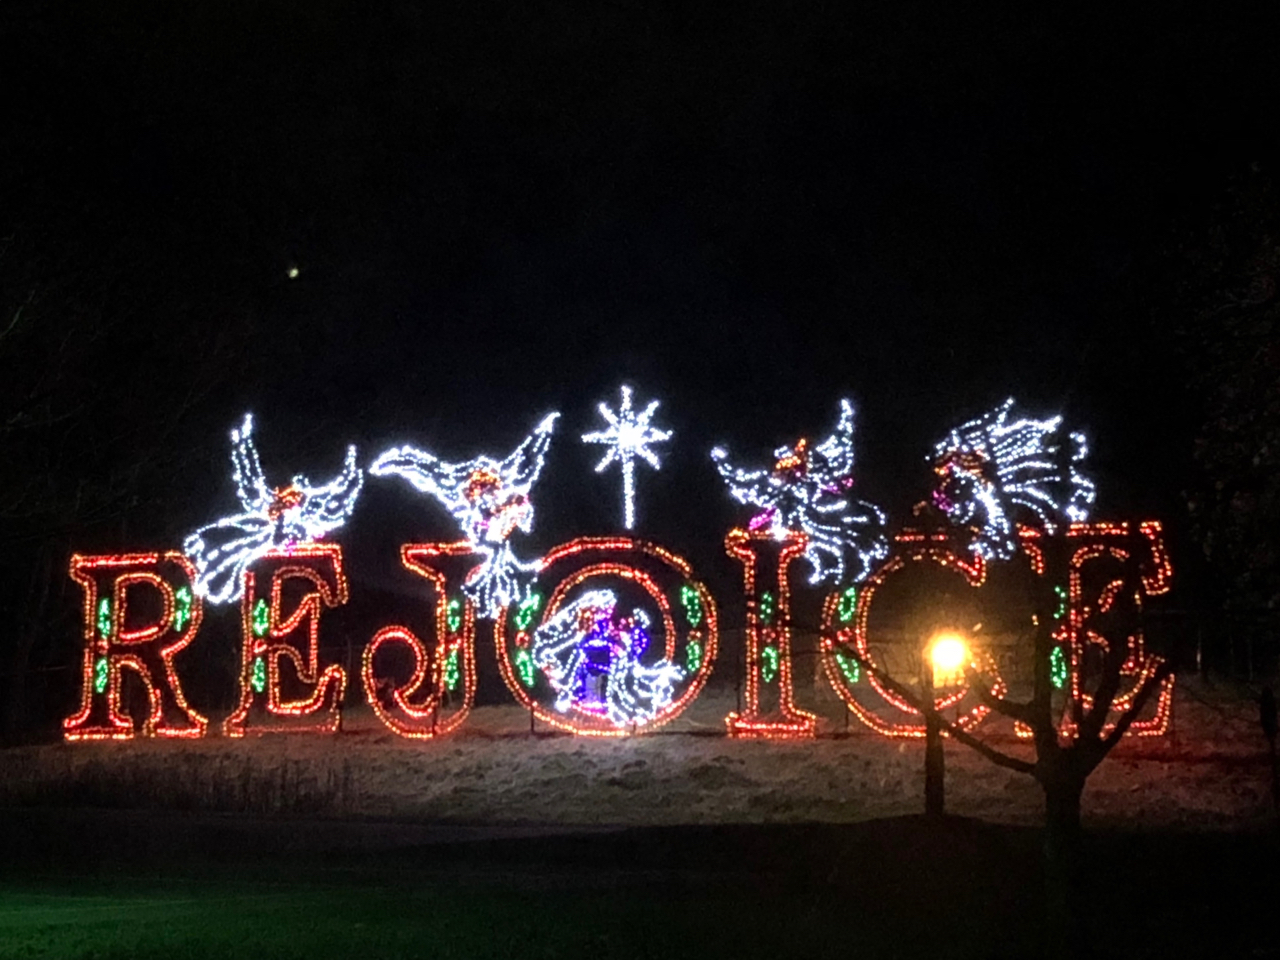 The word "Rejoice" in lights at Butch Bando's Fantasy of Lights in Columbus, Ohio